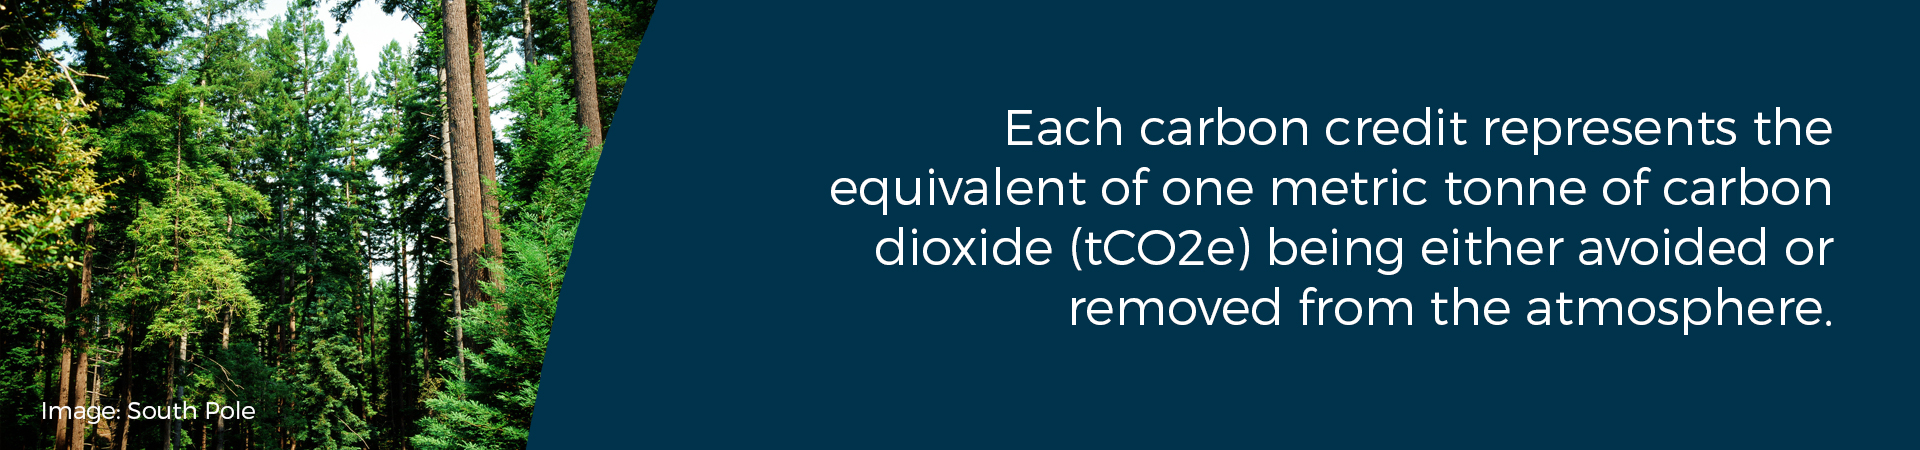 Banner - "Each carbon credit represents the equivalent of one metric tonne of carbon dioxide (tCO2e) being either avoided or removed from the atmosphere"